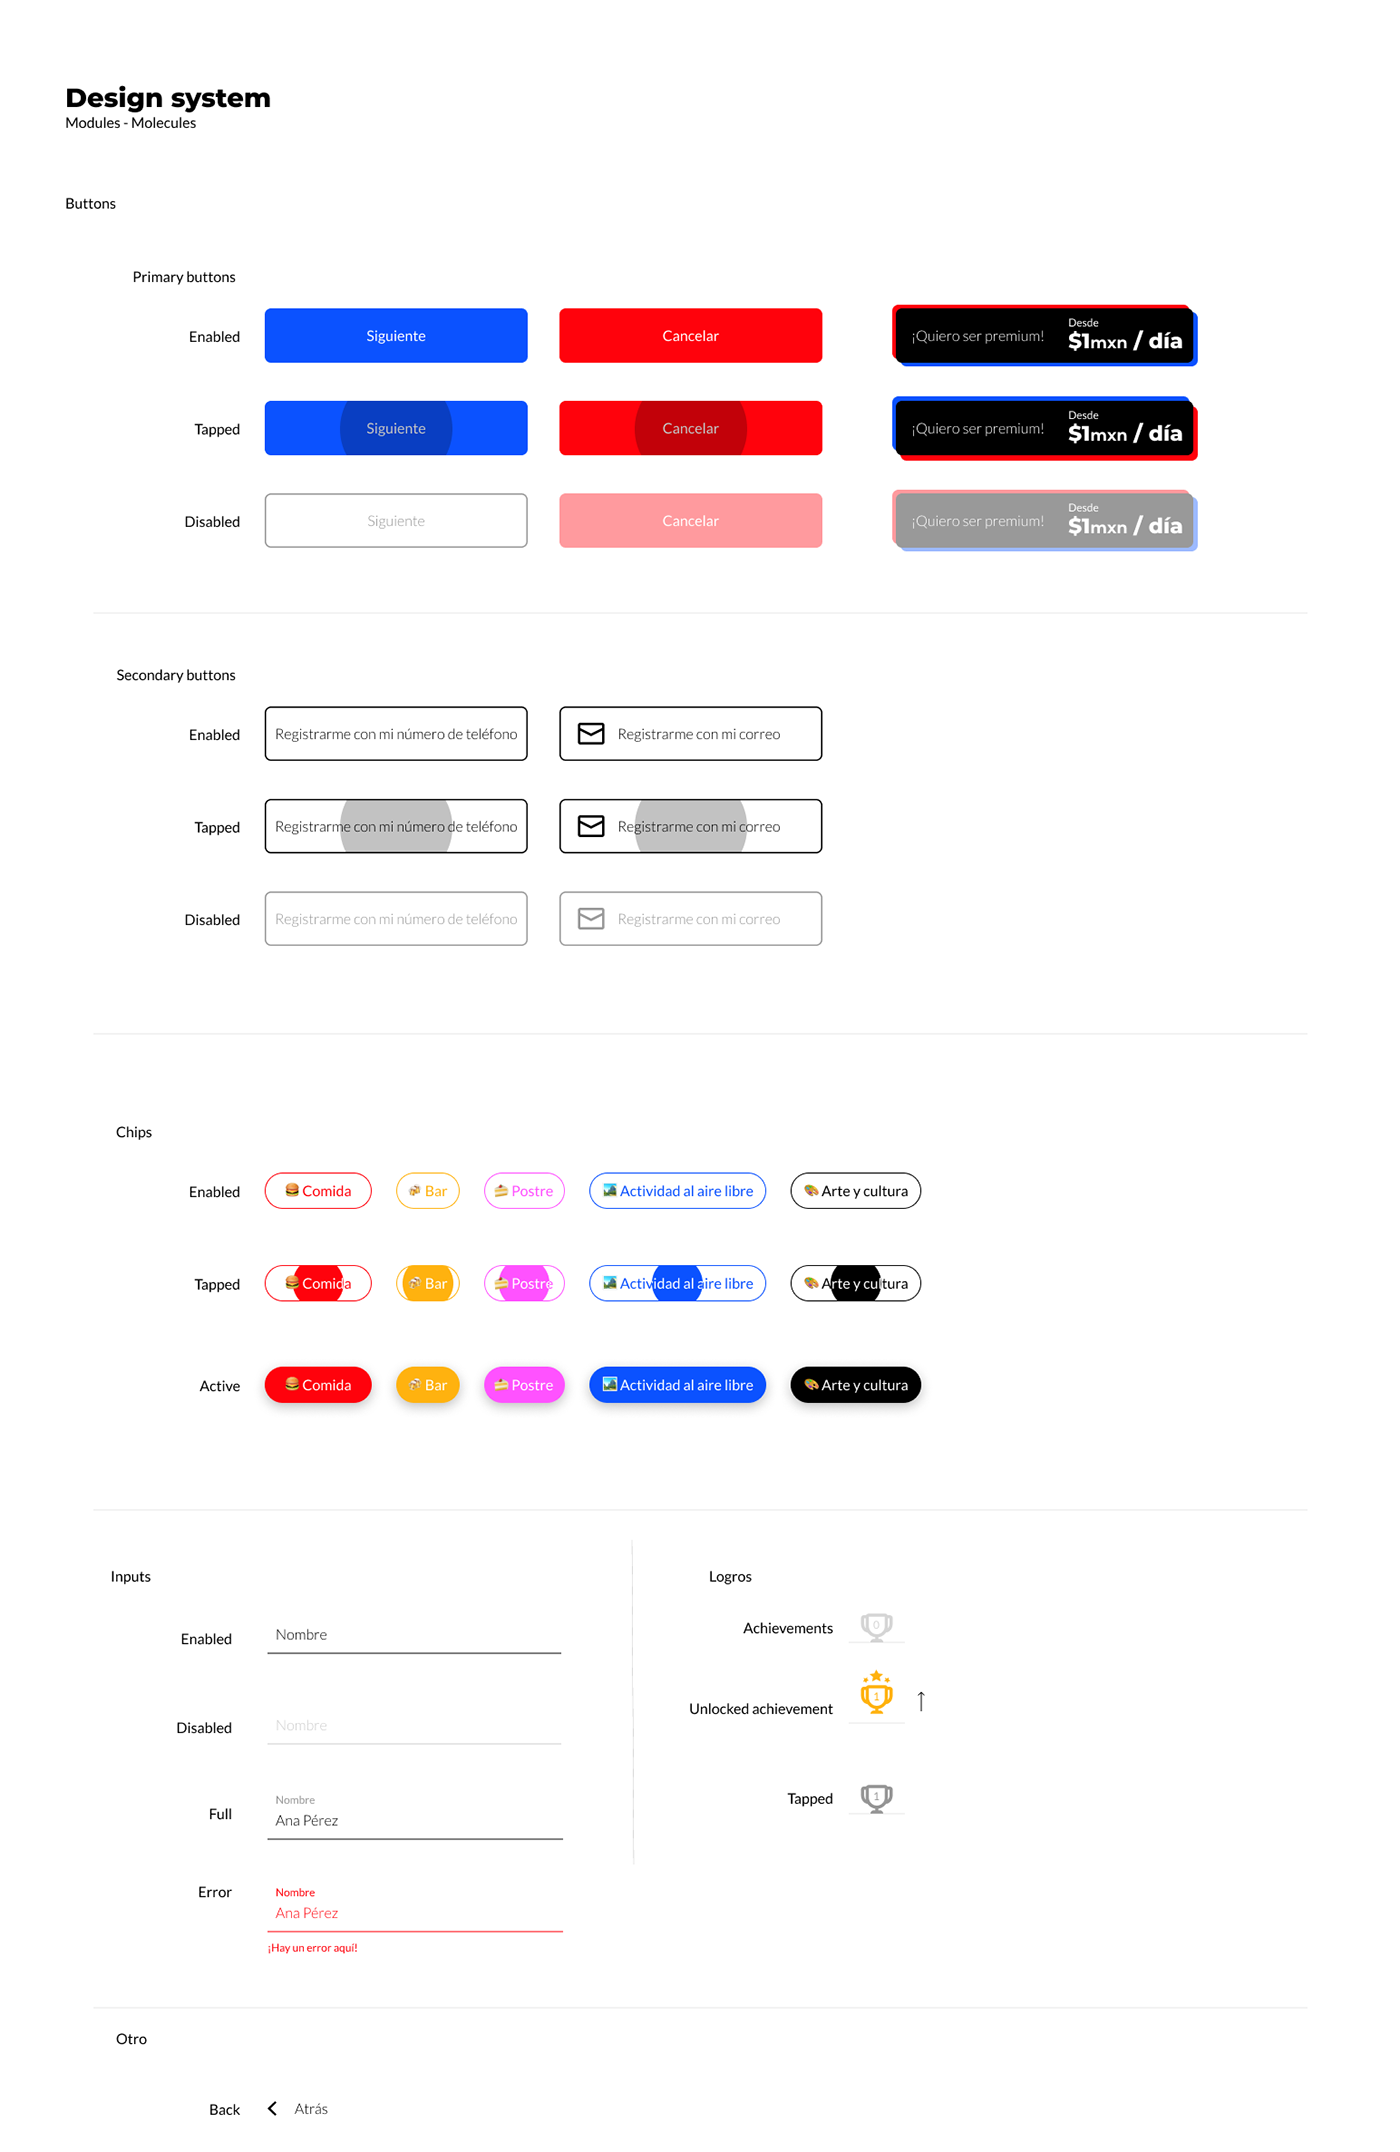 design system product design  UI user experience user interface ux UX design ux/ui visual design wireframes